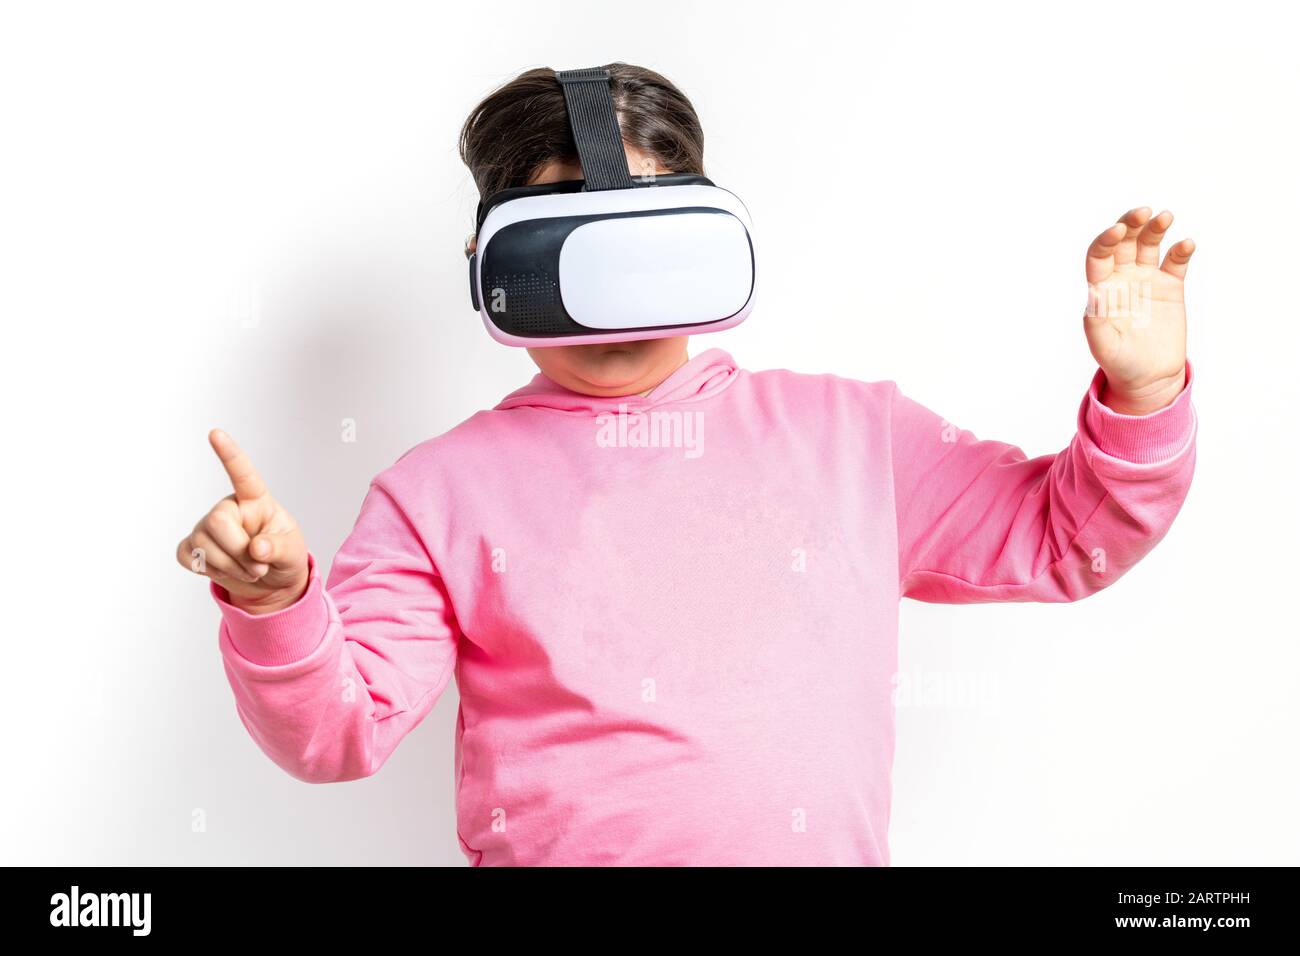 Girl wearing pink sweatshirt with virtual reality glasses on white background Stock Photo